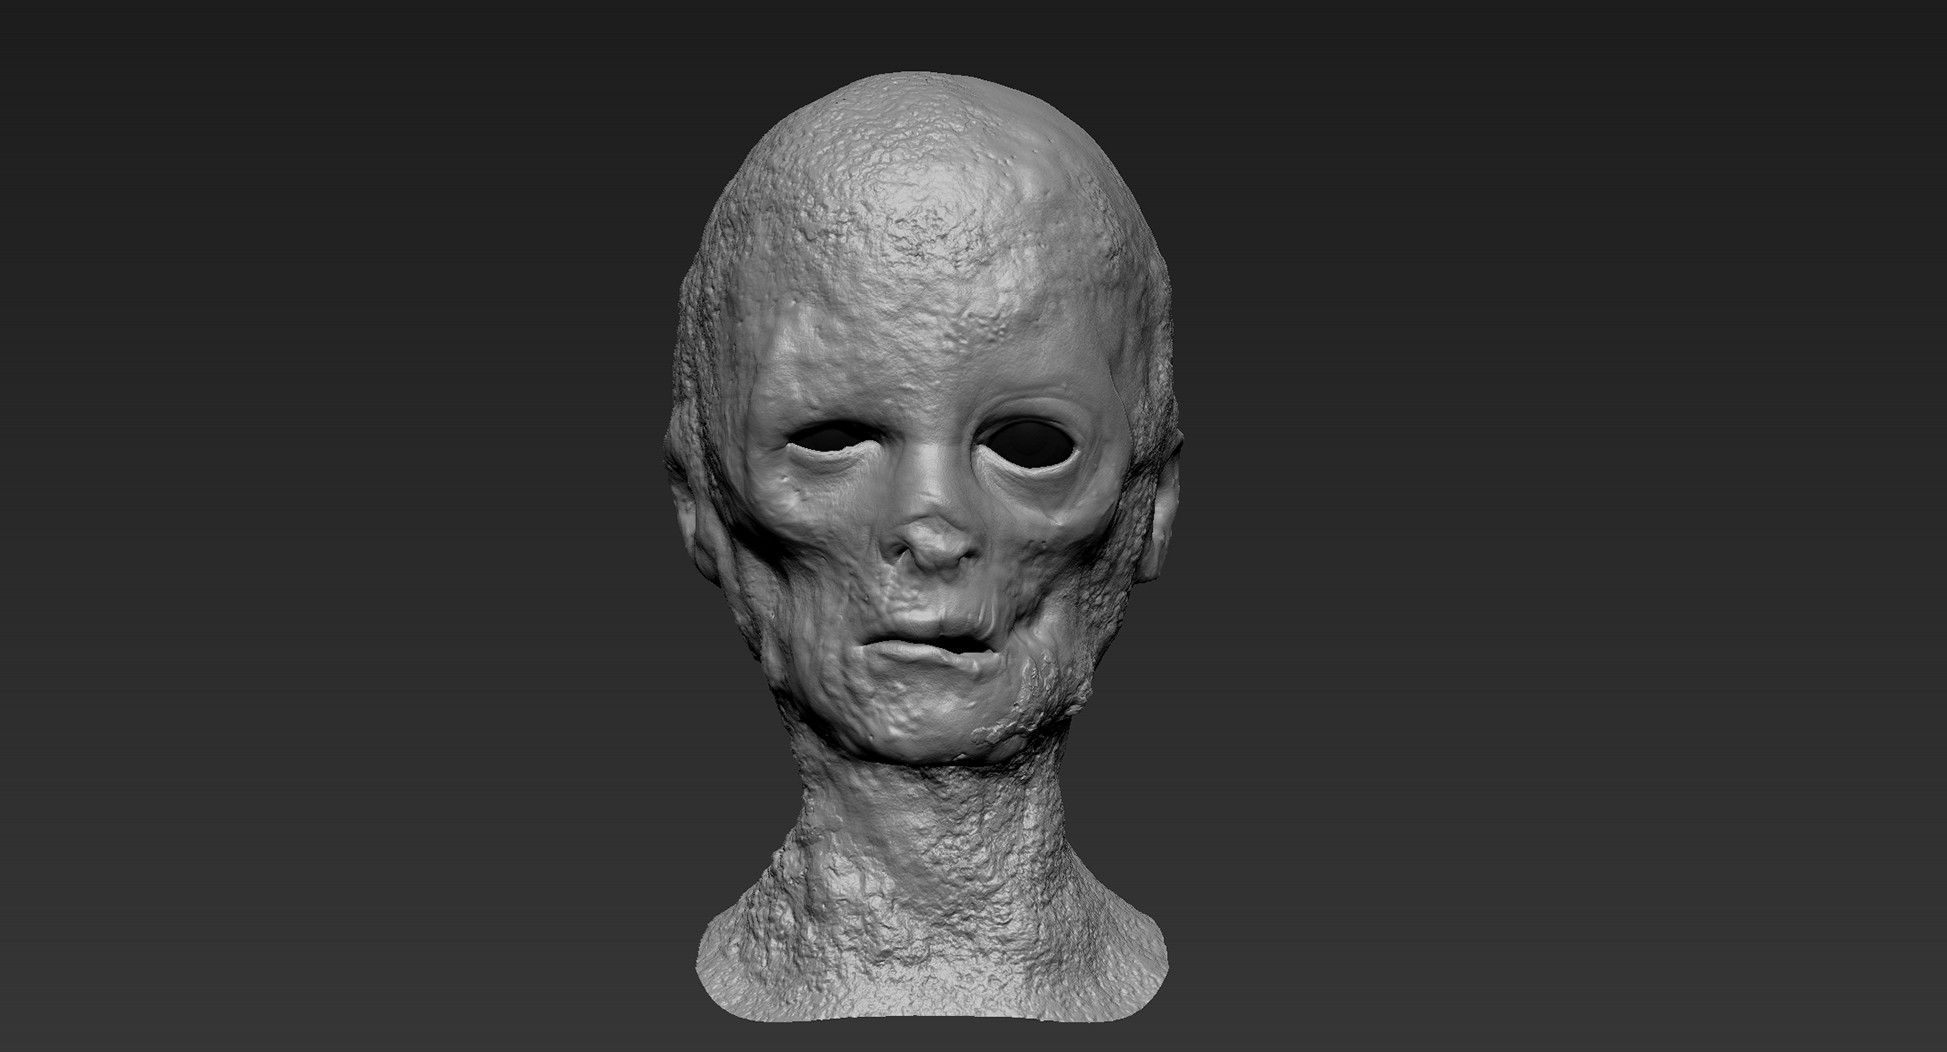 Zbrush view of the head